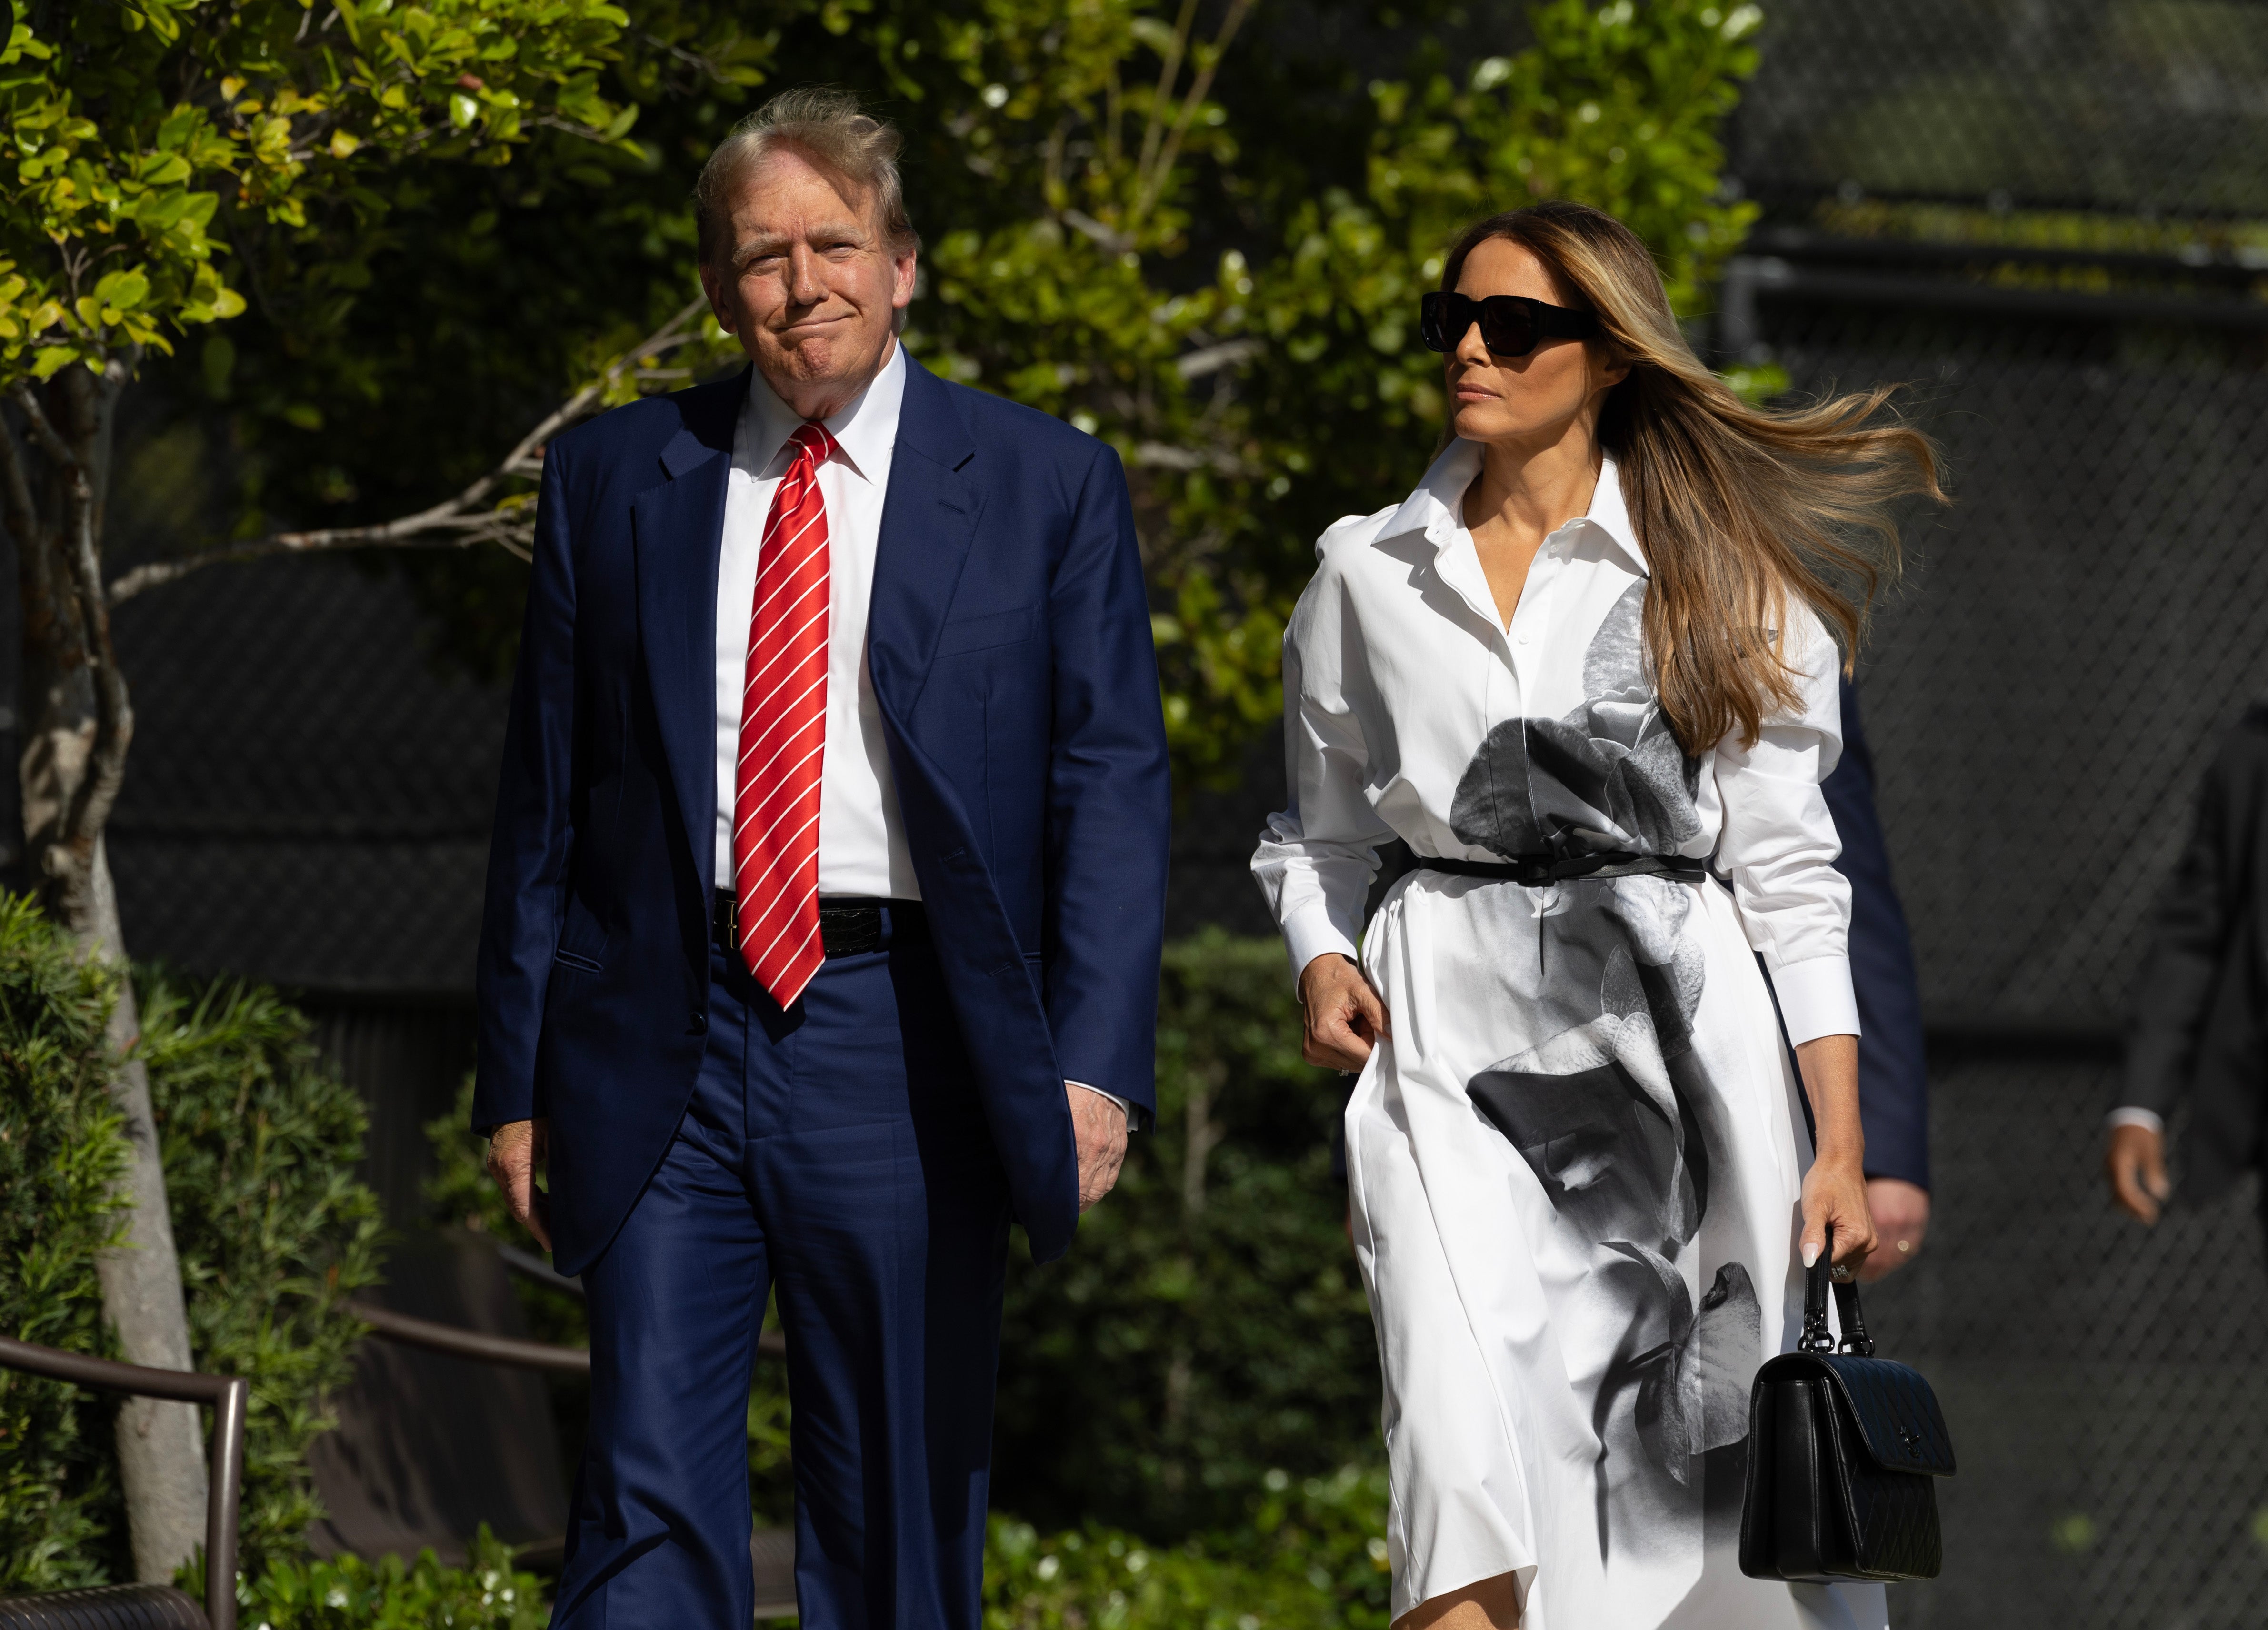 Former US President Donald Trump and former first lady Melania Trump walk together as they prepare to vote at a polling station in Florida